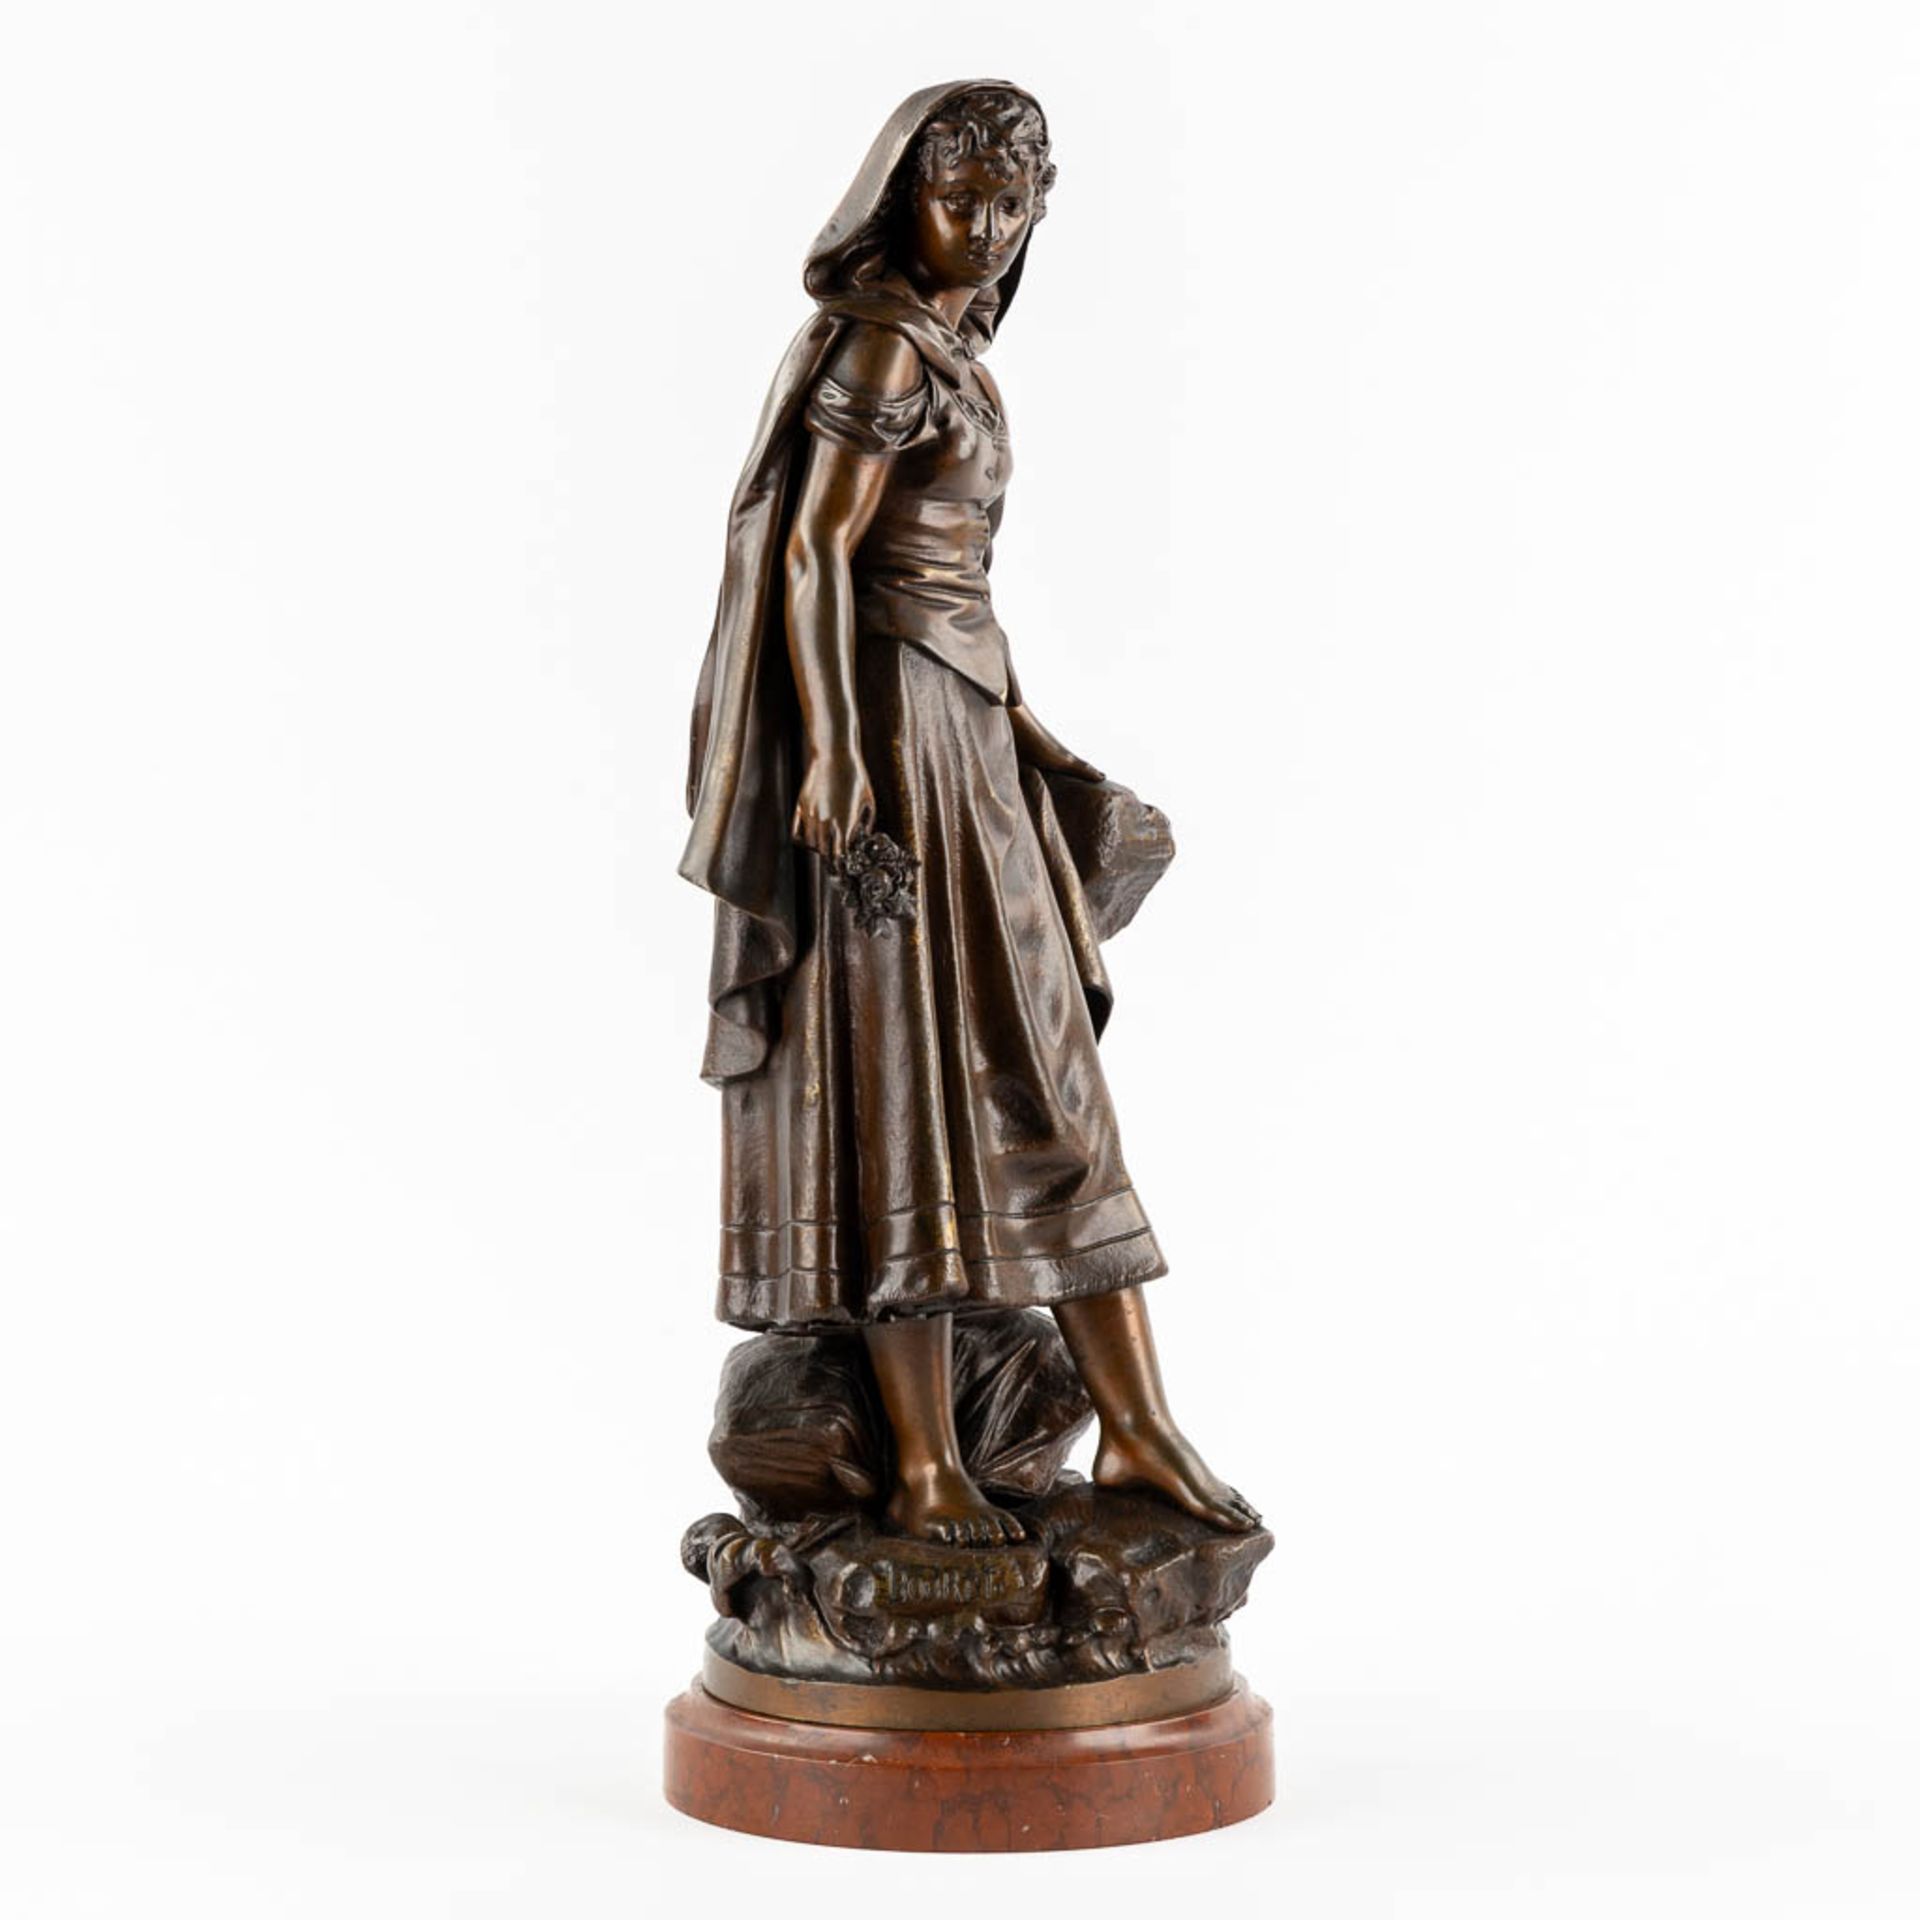 Eutrope BOURET (1833-1906) 'Lady with flowers' patinated bronze on a marble base. (L:19 x W:17 x H:4 - Image 3 of 11